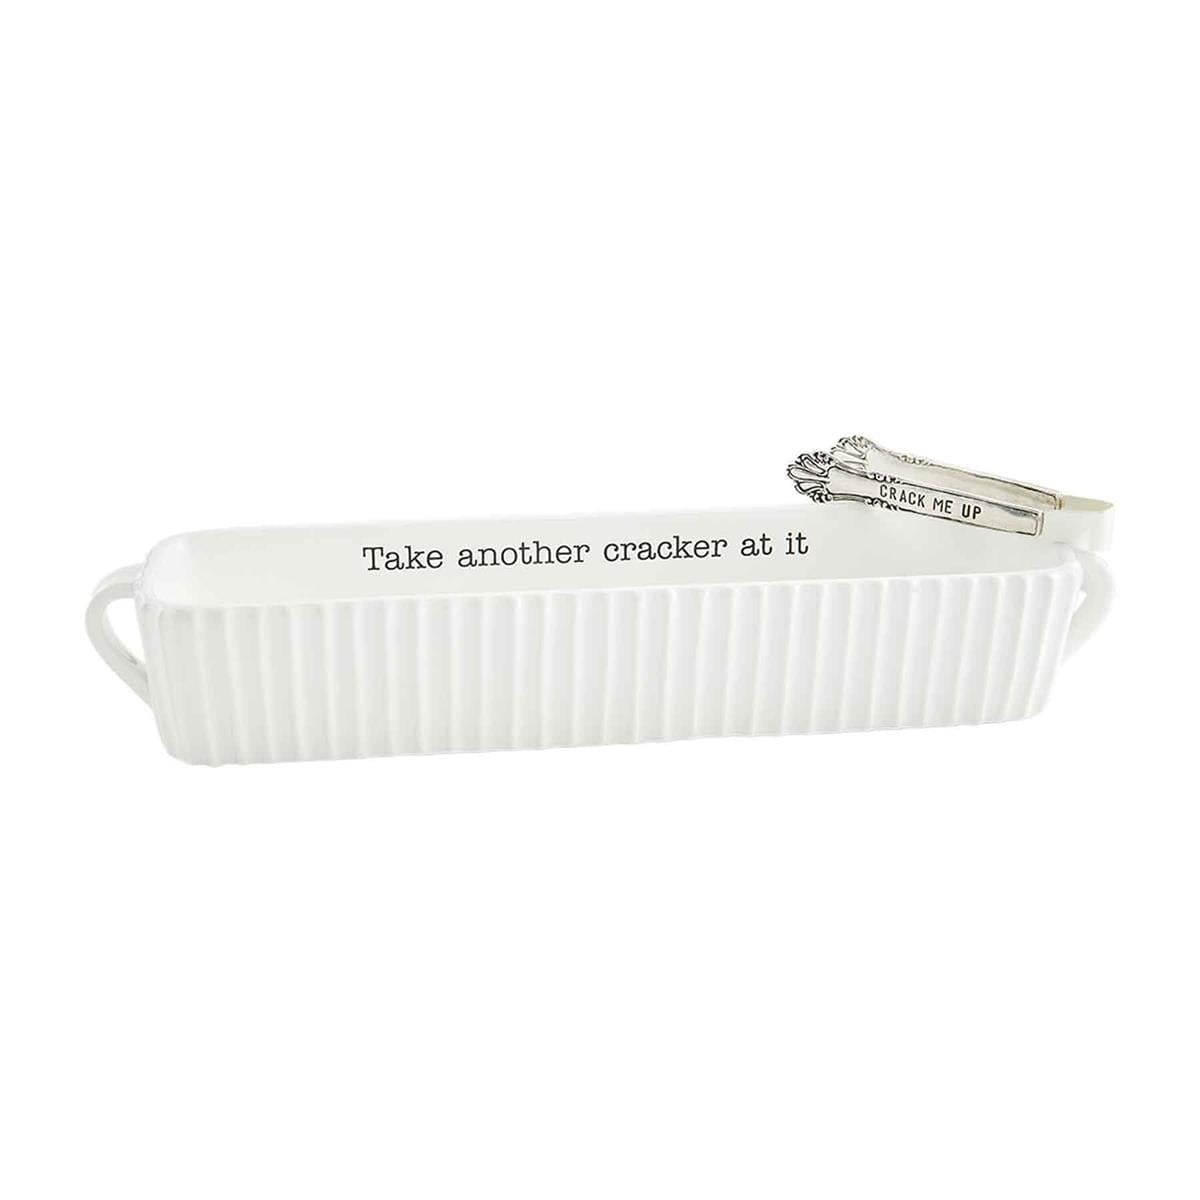 Serving Dishes Serving Dishes - Cracker Dish Set - Mud Pie MP-42300037